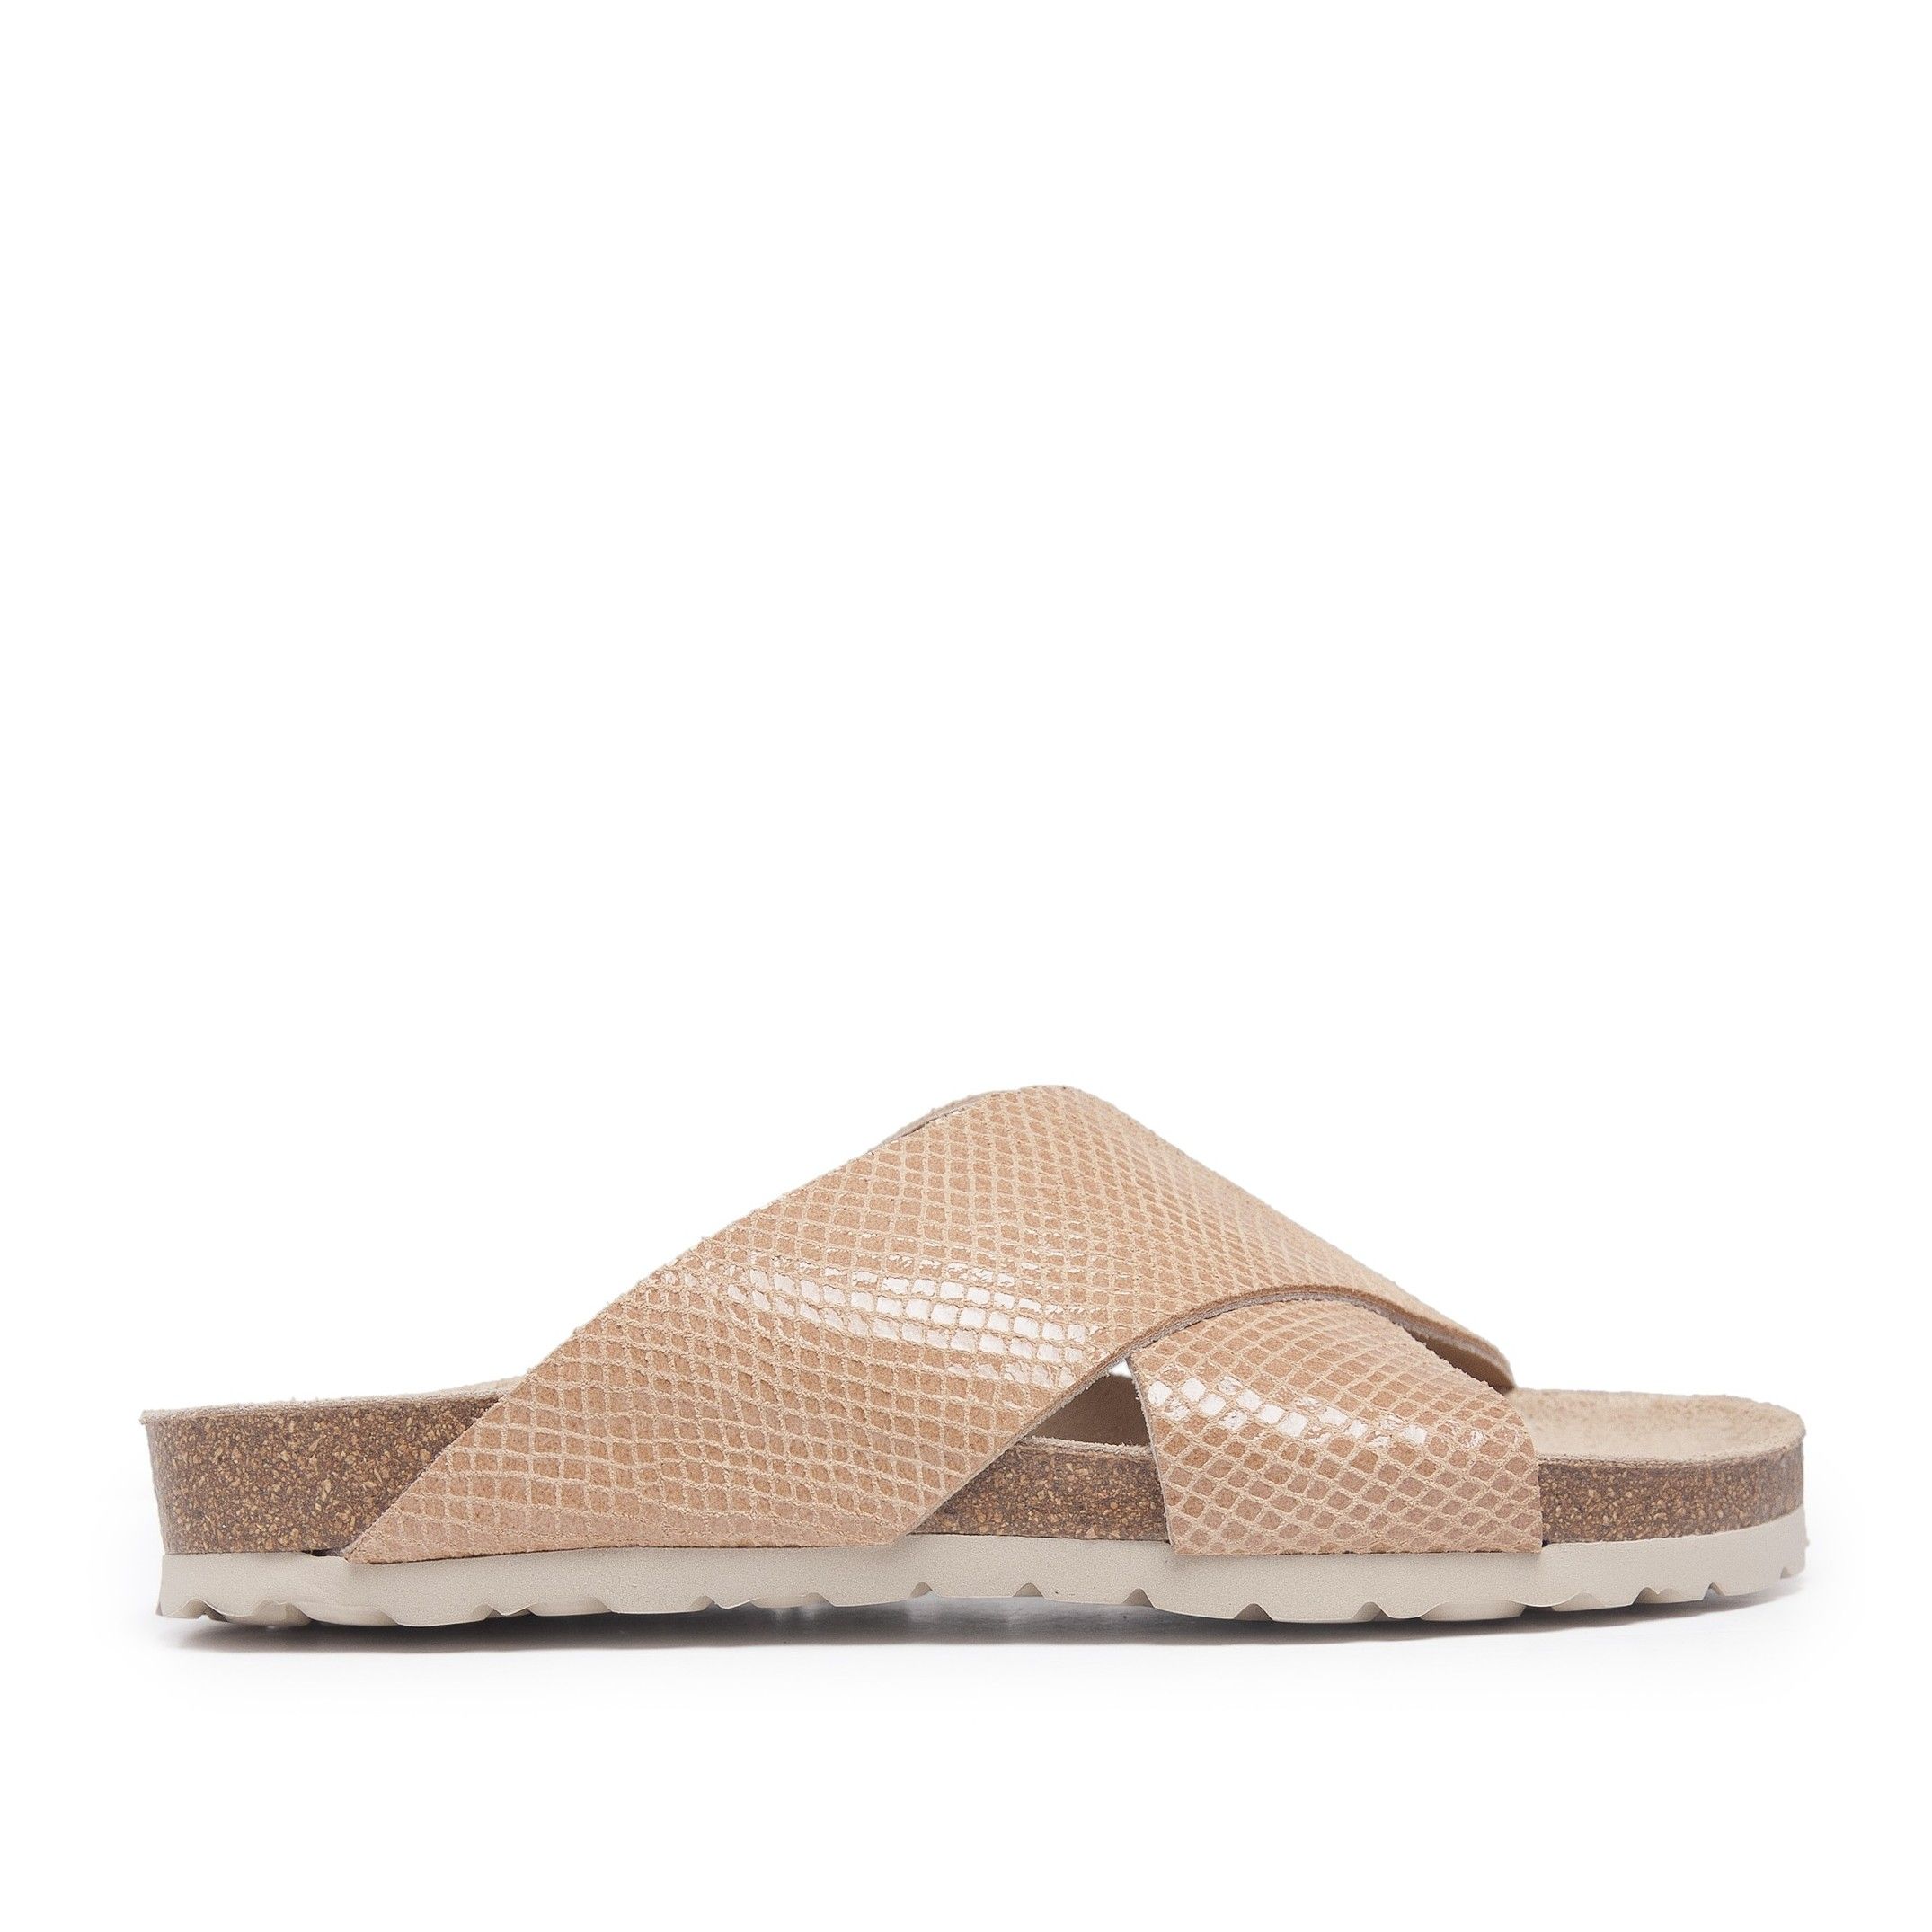 Bio sandal with crossed strips in leather with snake finish. Upper, inner and insole made of leather. Platform: 1 cm. Sole: EVA. This product is manufactured in Spain.